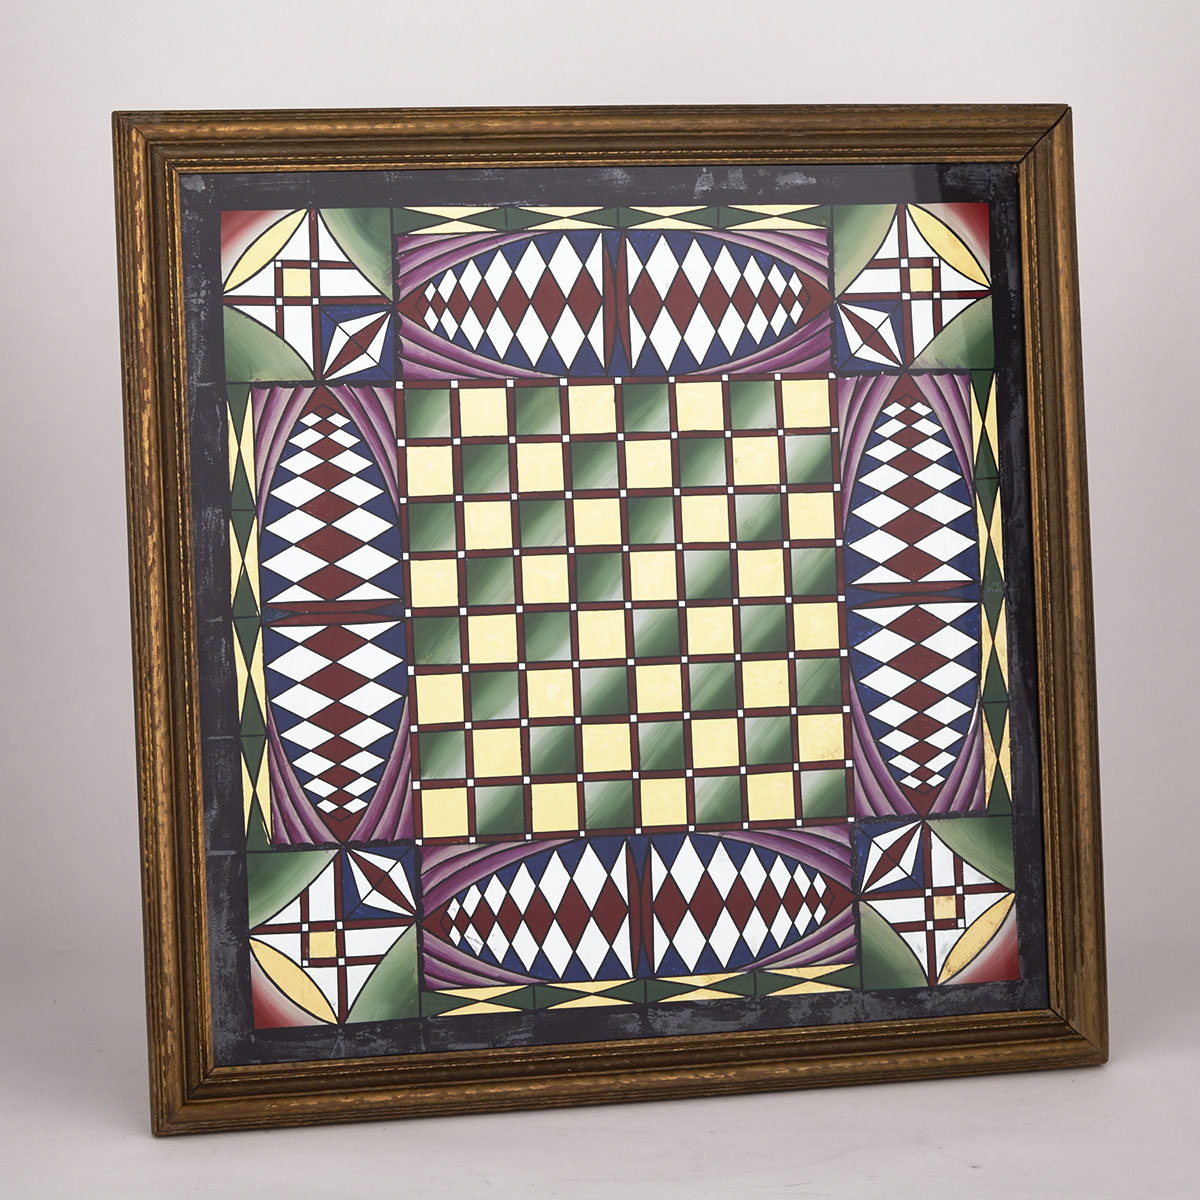 Reverse Painted Glass Chess/Games Board, early 20th century